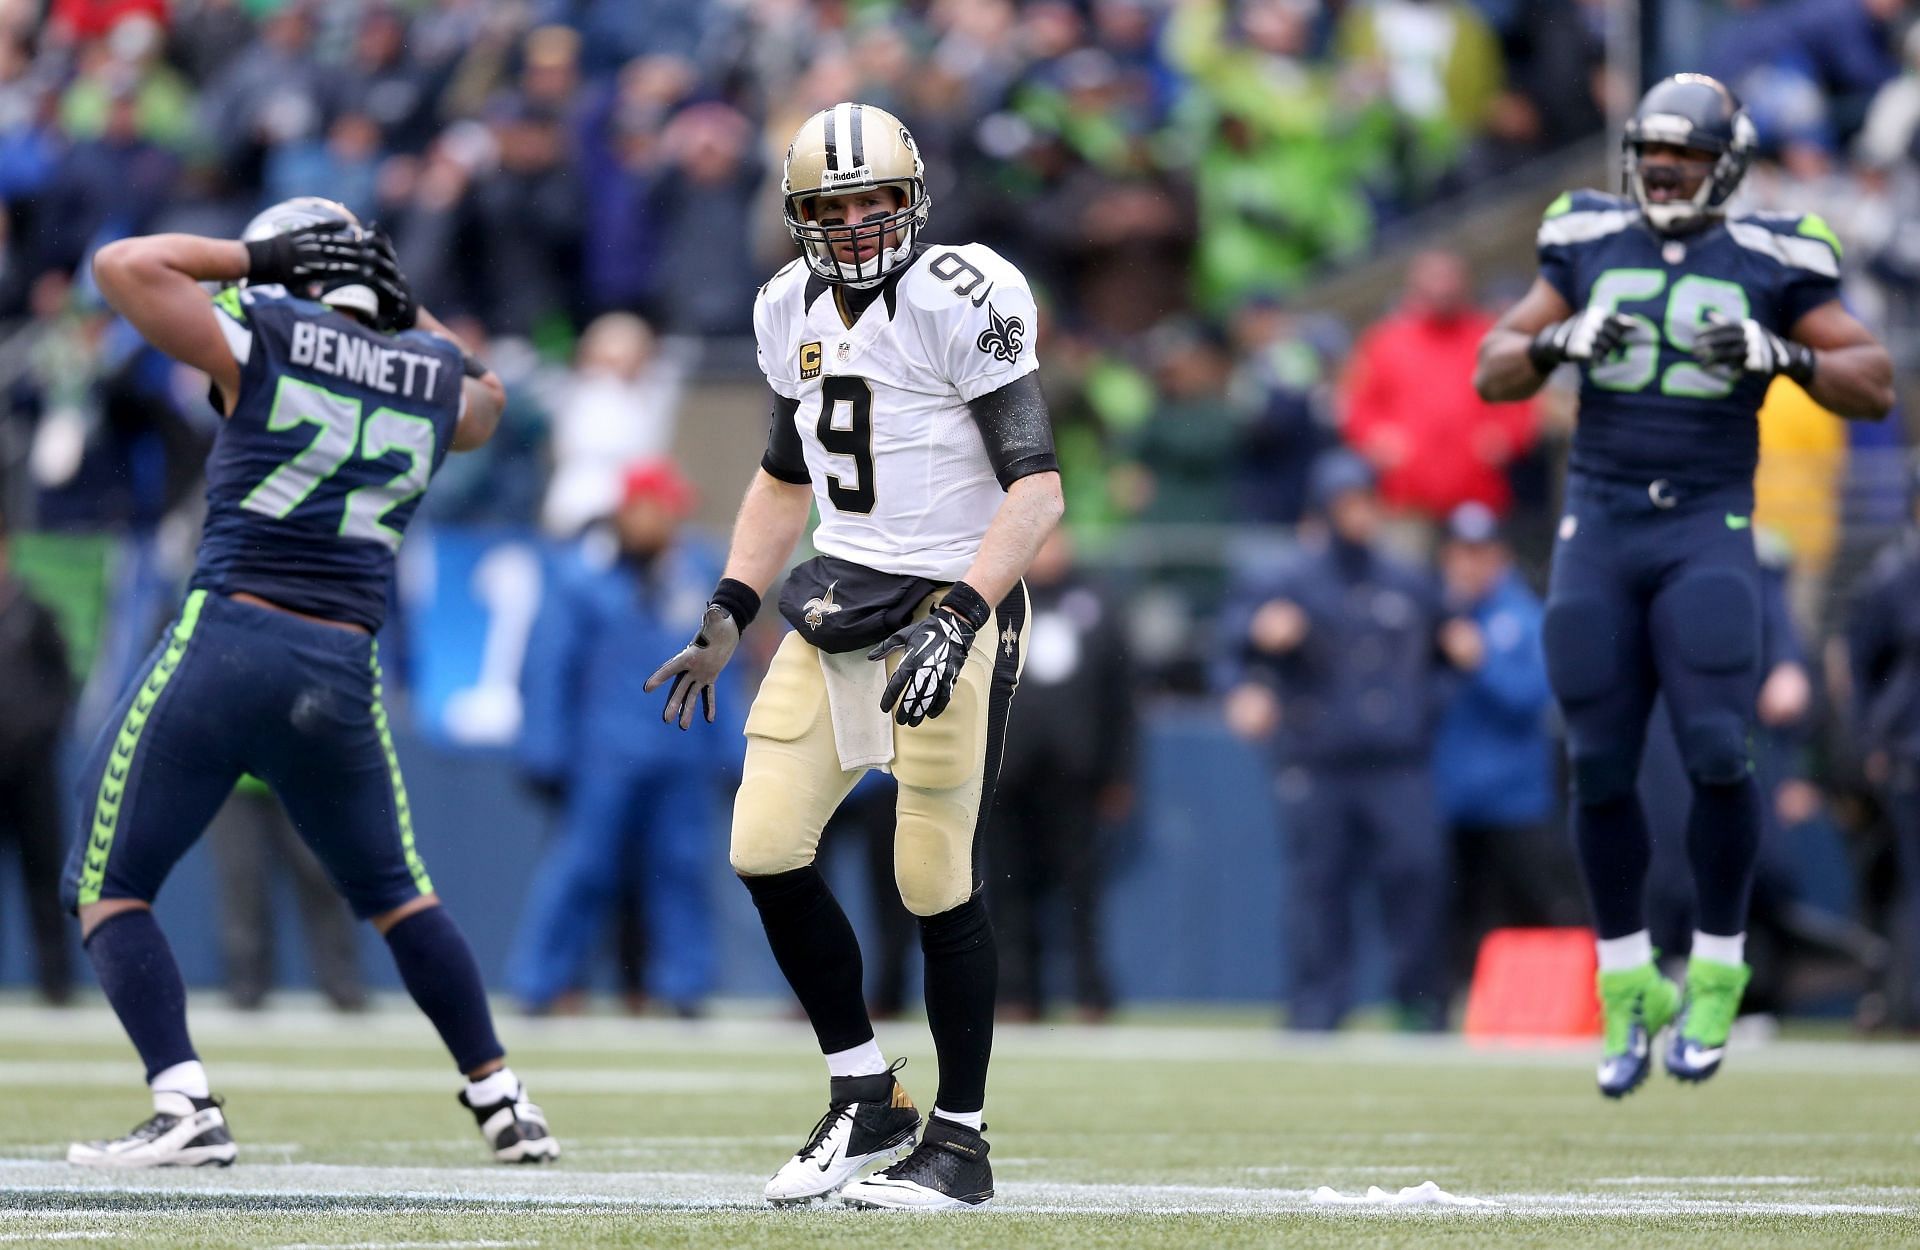 Drew Brees would change the complexion of the Seahawks&#039; direction